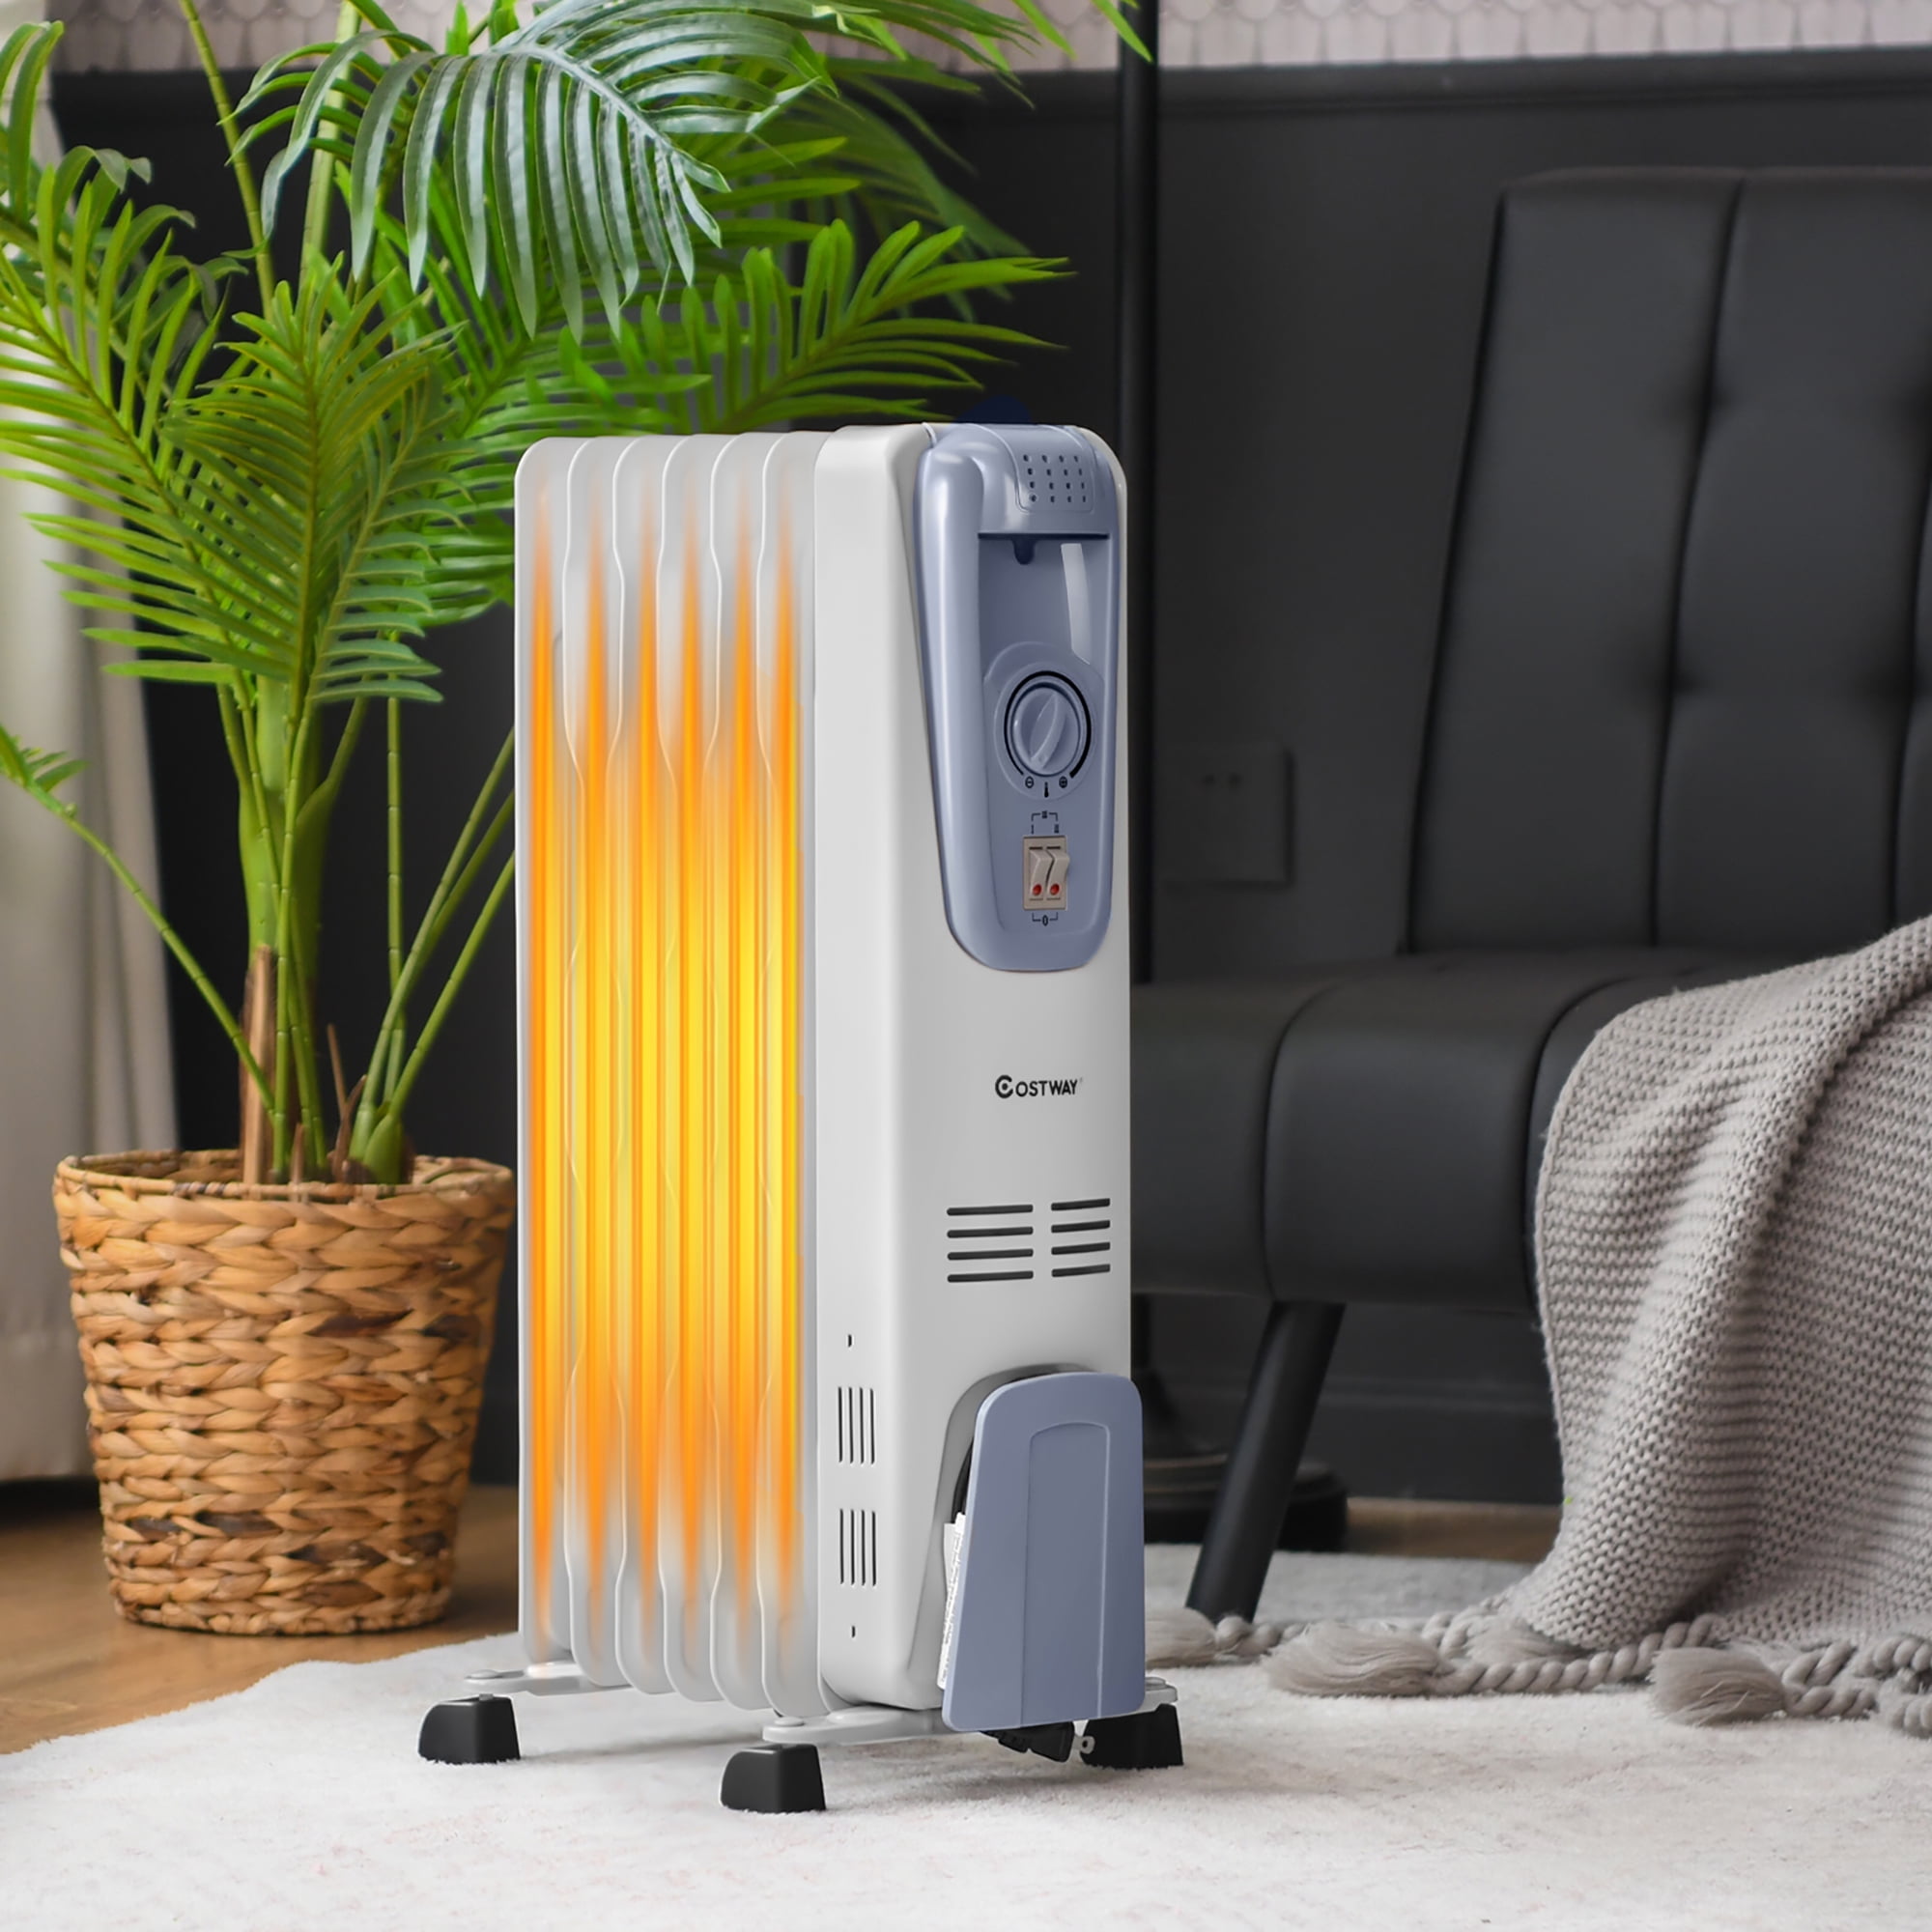  COSTWAY Oil Filled Radiator Heater, 700W Portable Space Heater  with Adjustable Thermostat, Overheat Protection, Electric Heater for  Bedroom, Indoor use : Home & Kitchen